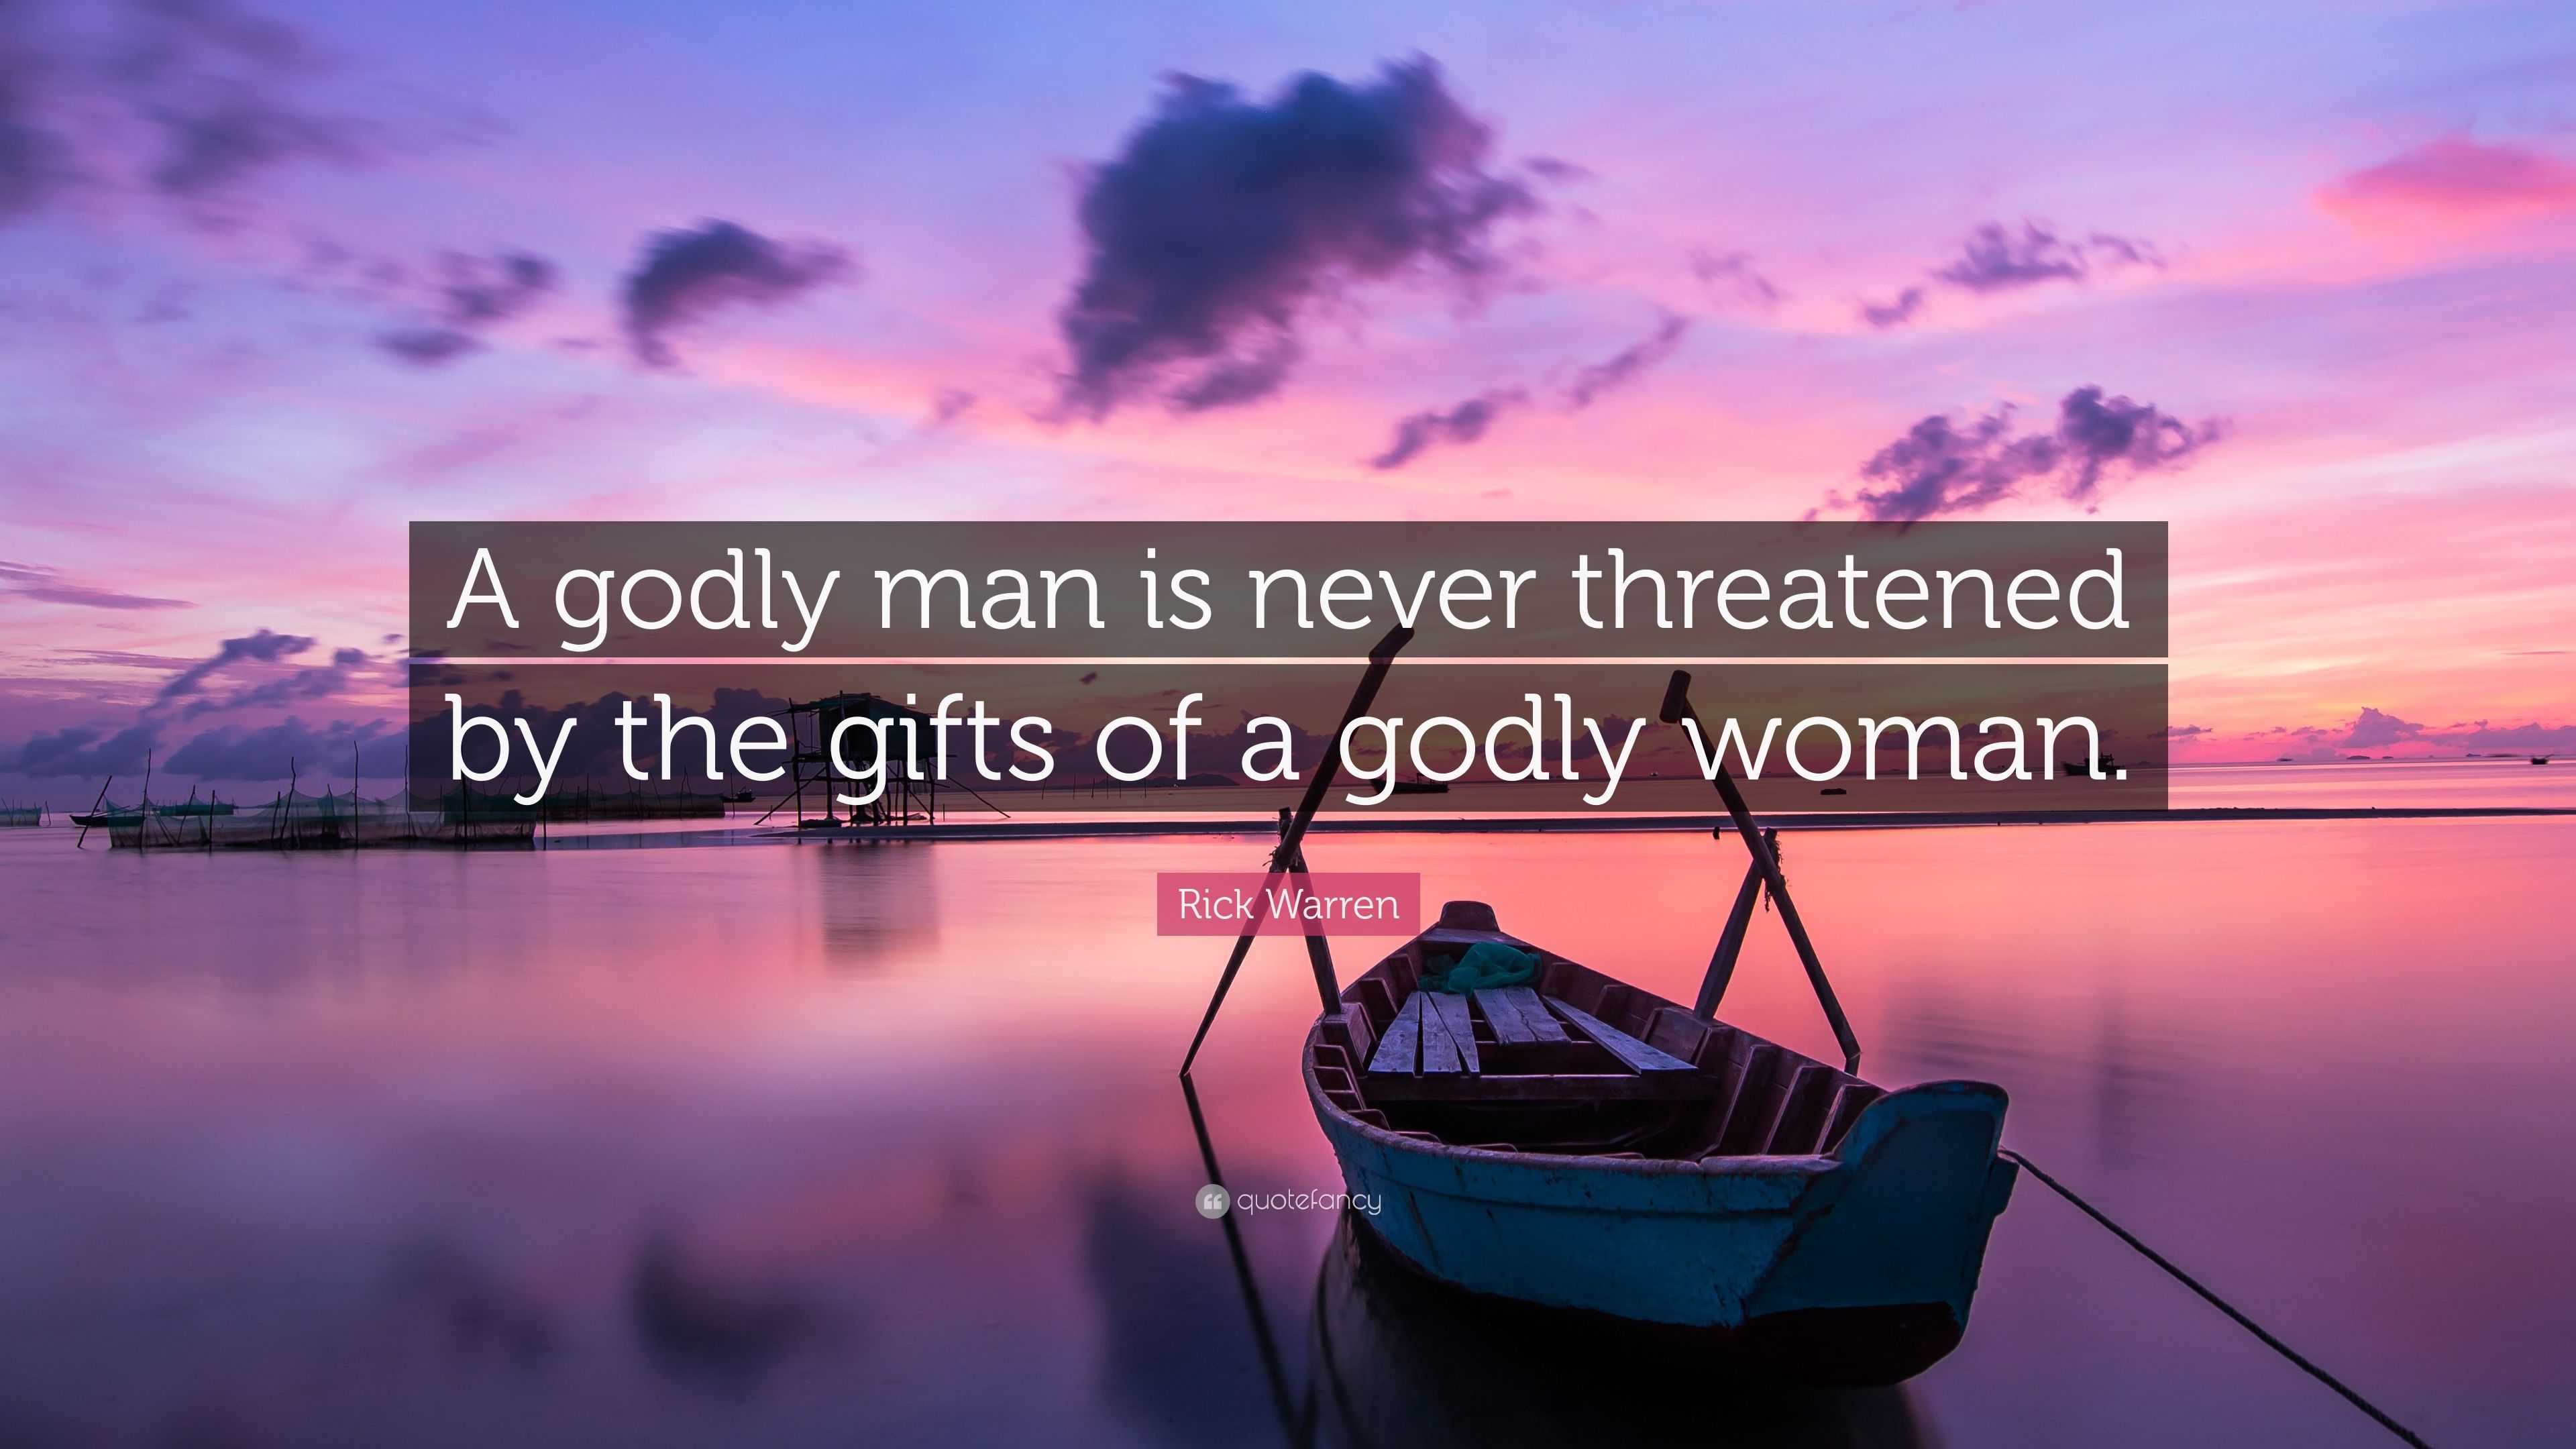 Rick Warren Quote: "A godly man is never threatened by the gifts of a ...